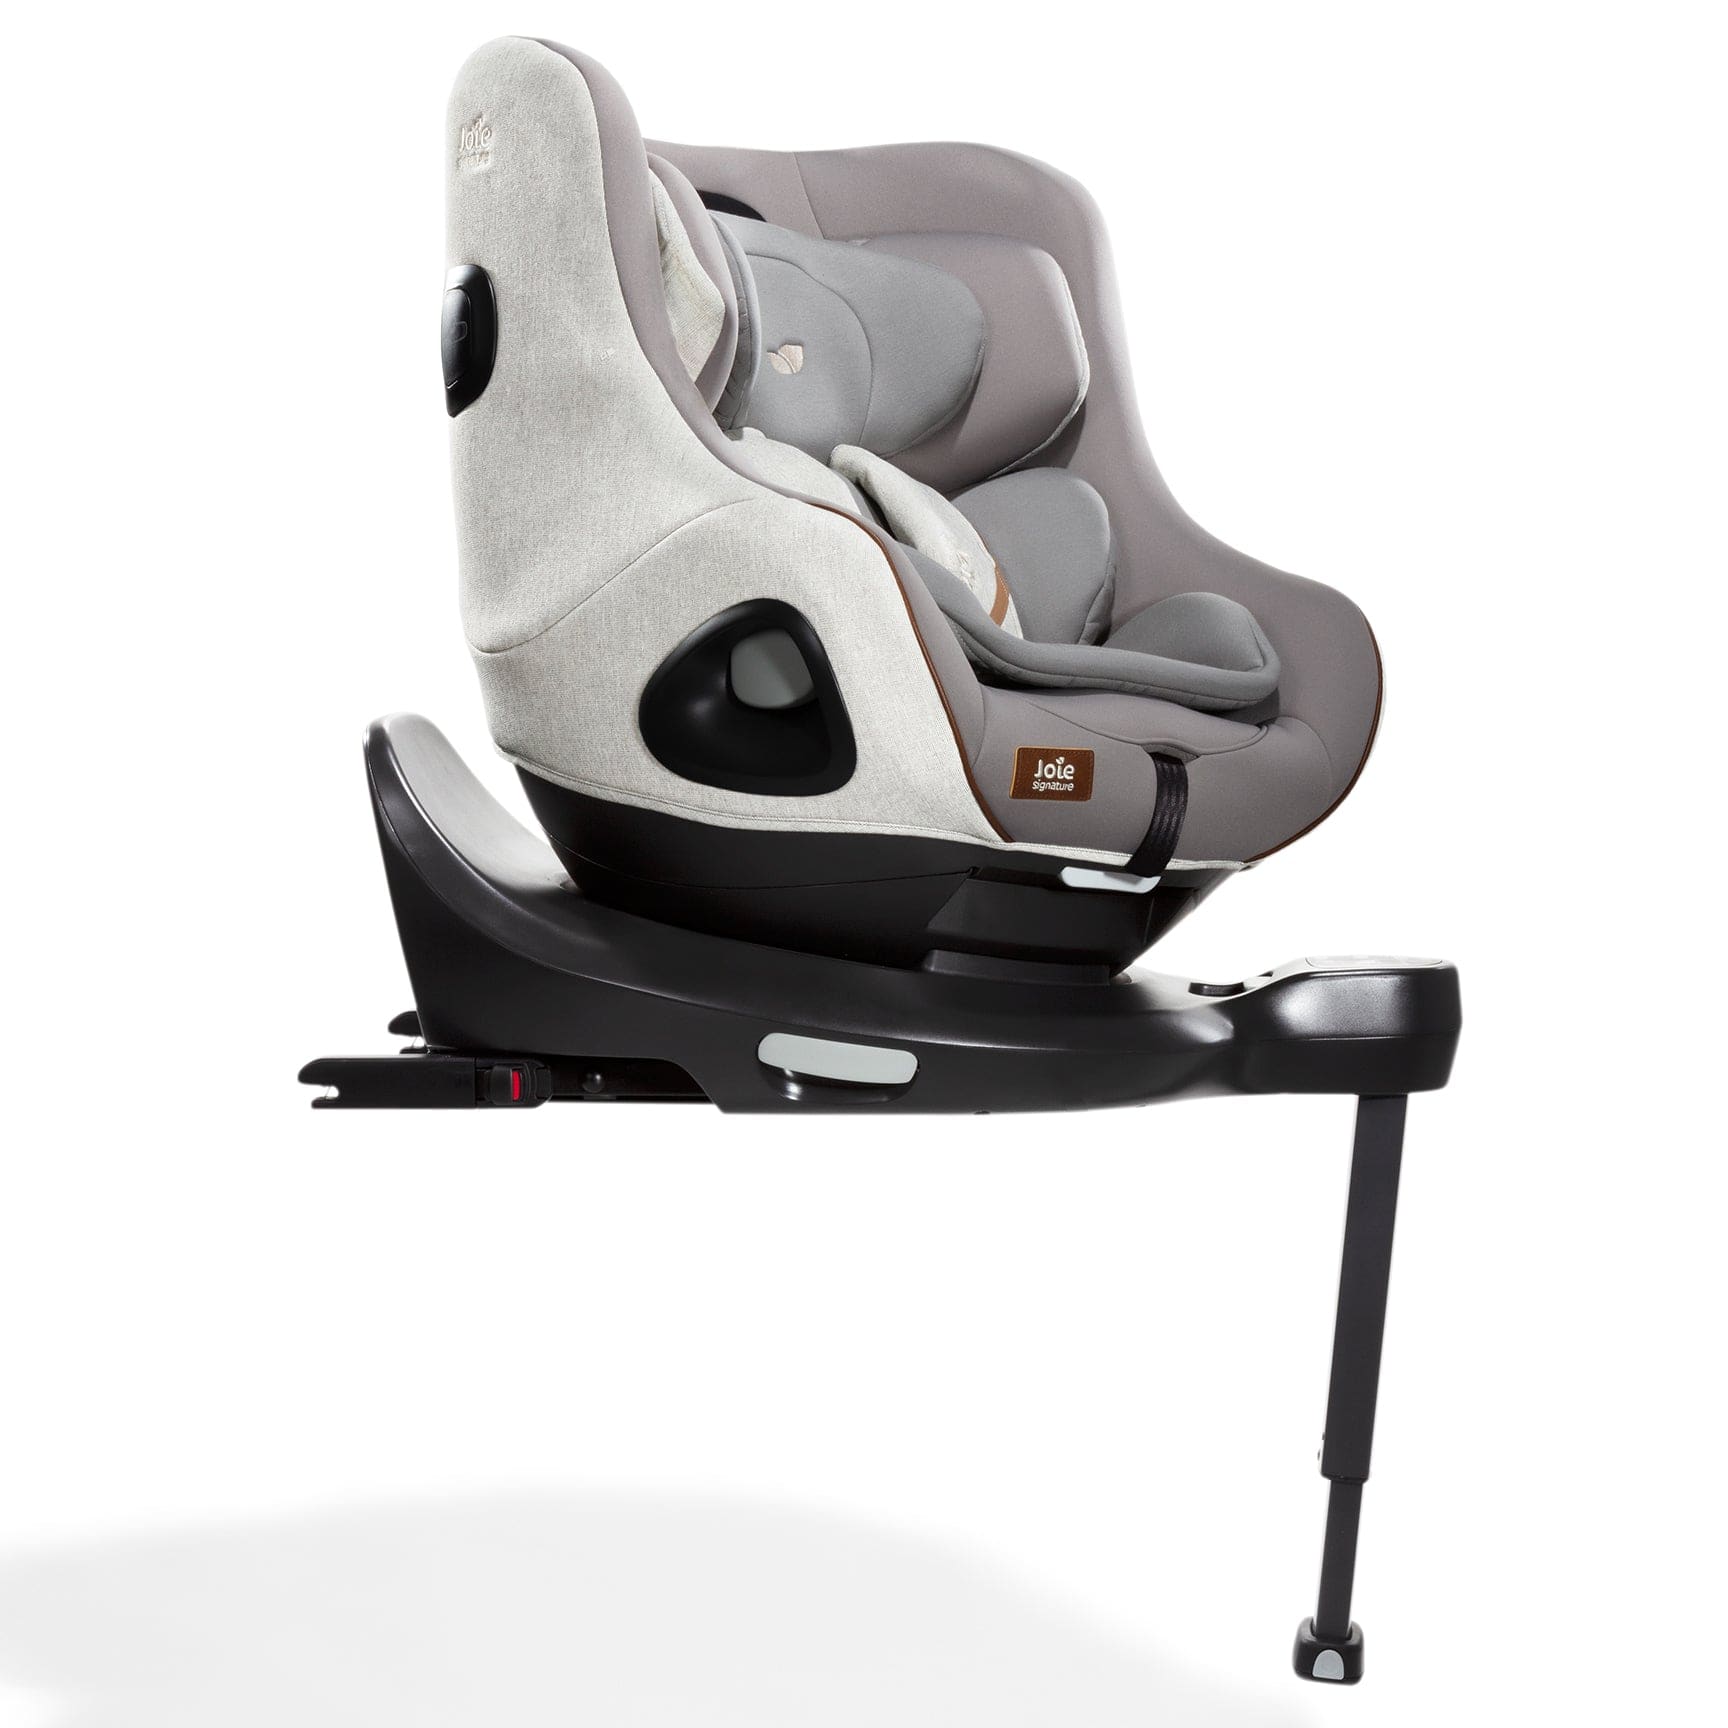 Joie i-Harbour in Oyster Swivel Car Seats C214AAOYS000 5056080612461